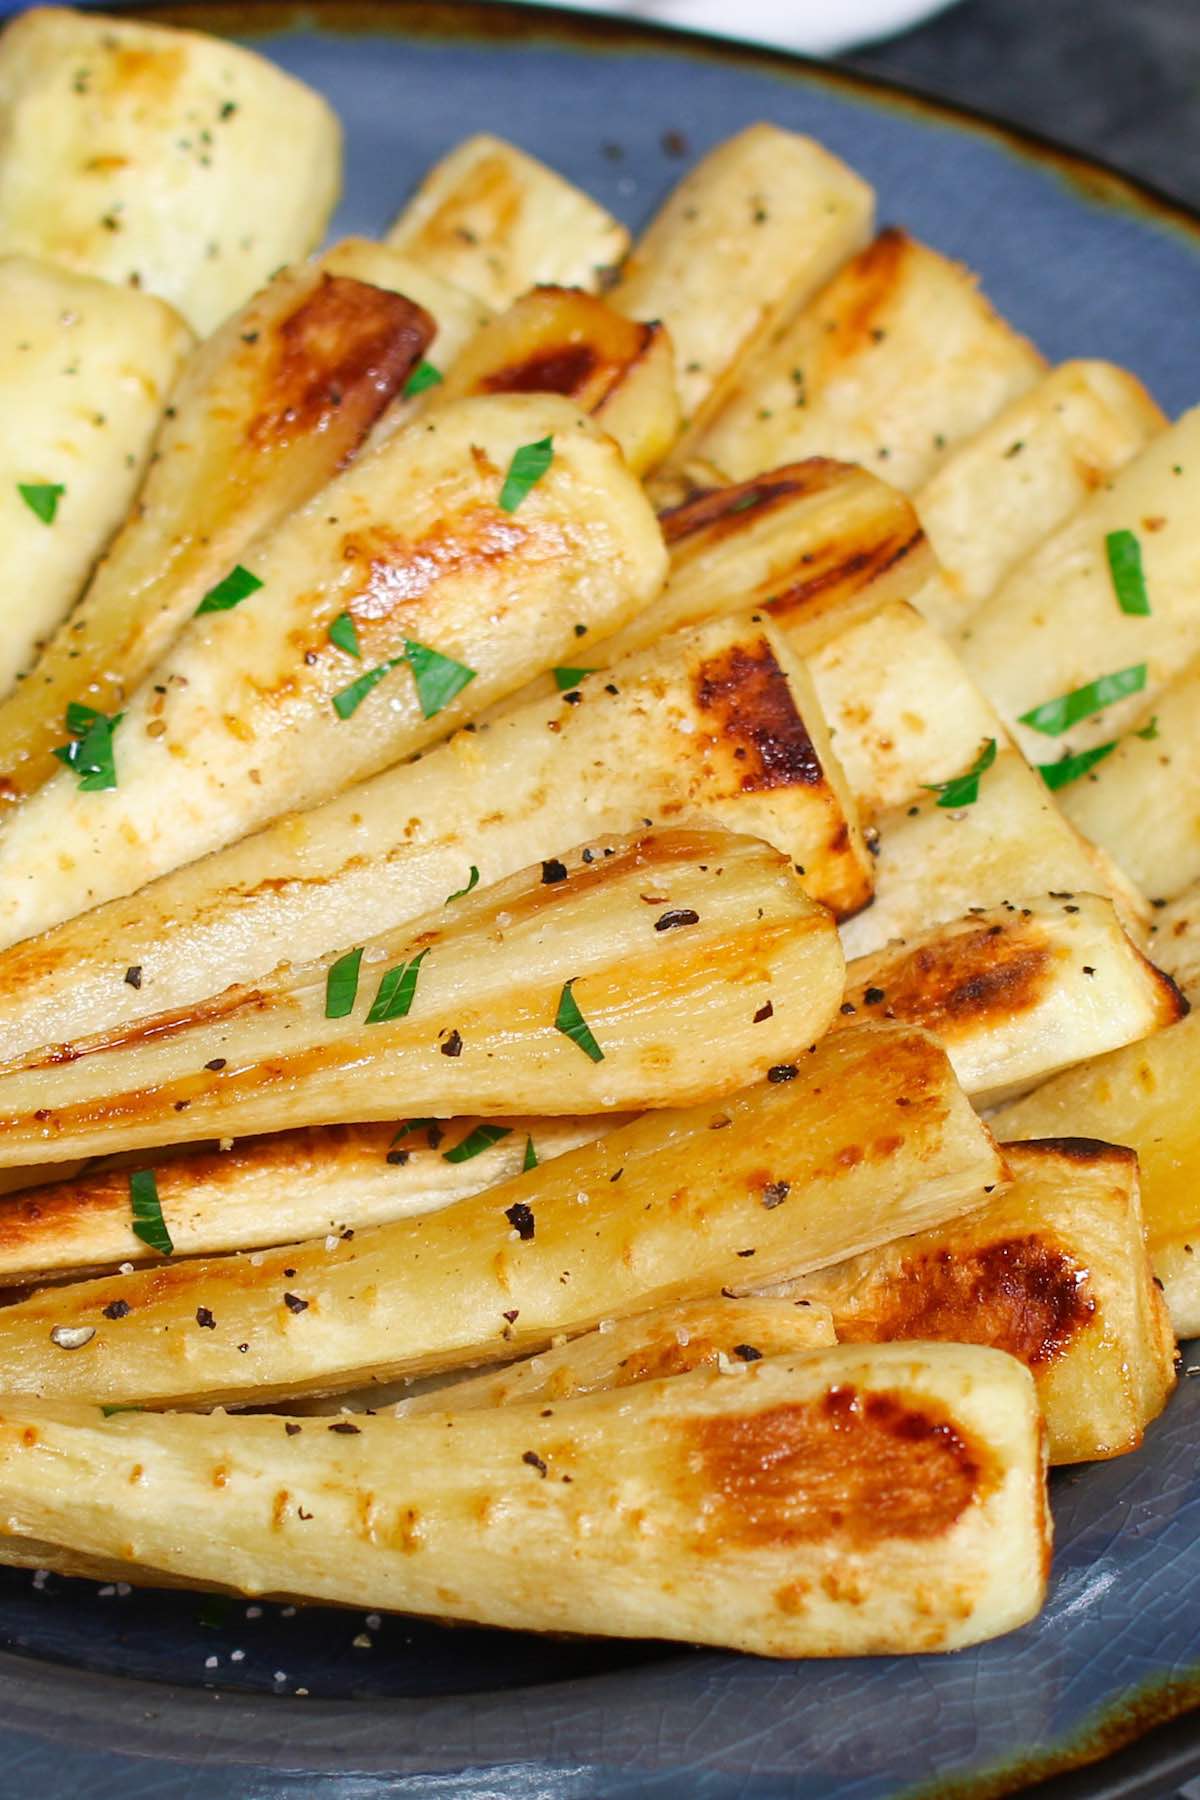 Roasted parsnips served on plate, and topped with chopped parsley.